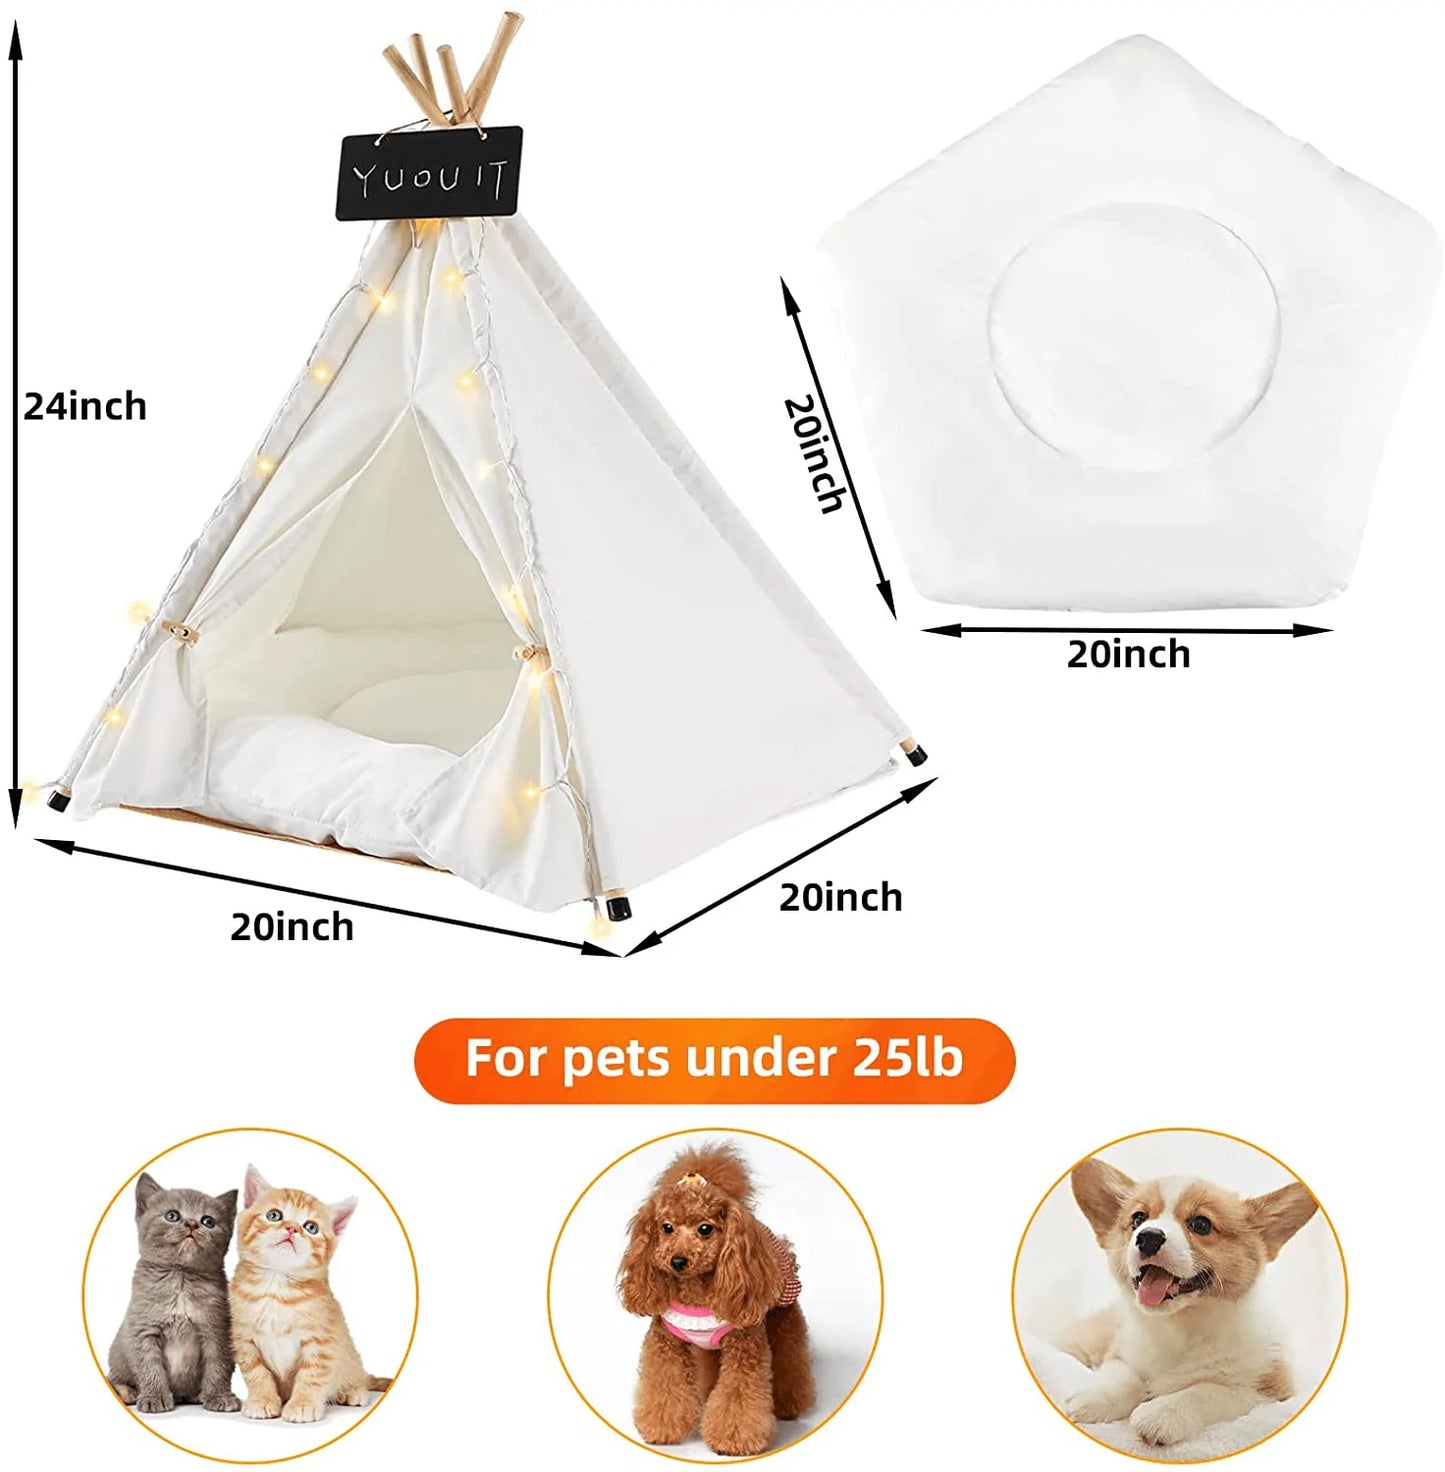 YUOUIT Pet Teepee Pet Tent with LED Light String Portable Puppy Bed for Small Dogs and Cats Folding Dogs House with Cushion for Indoor and Outdoor,Christmas,24Inches.¡­ Animals & Pet Supplies > Pet Supplies > Dog Supplies > Dog Houses YUOUIT   